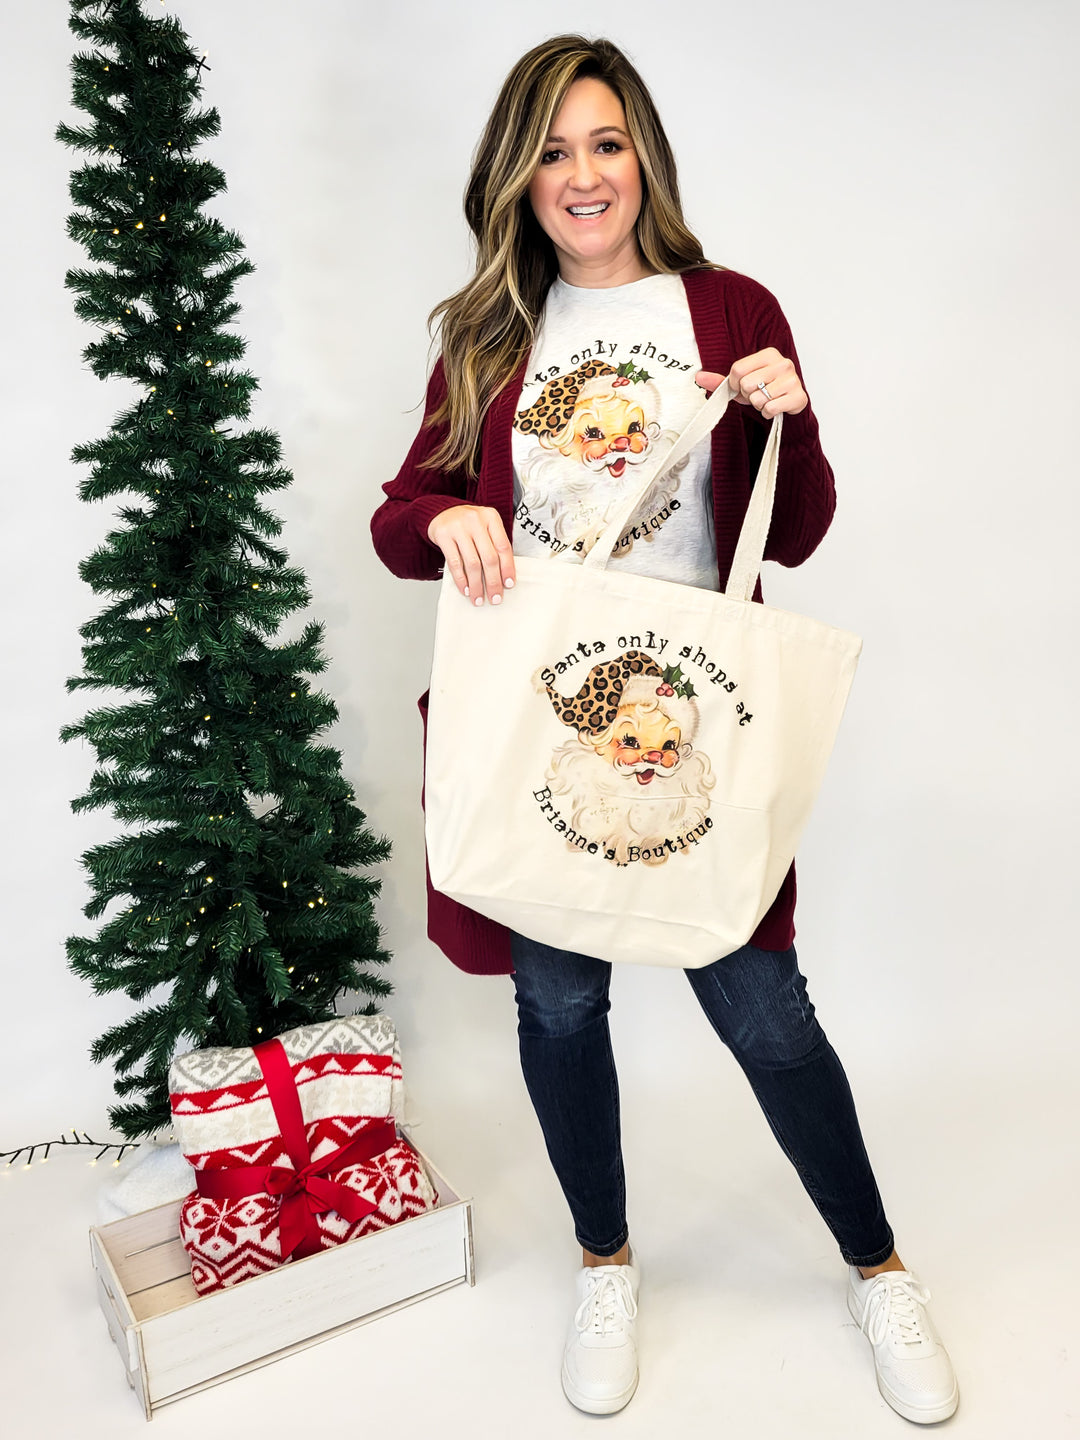 SANTA ONLY SHOPS AT BRIANNE'S BOUTIQUE TOTE BAG